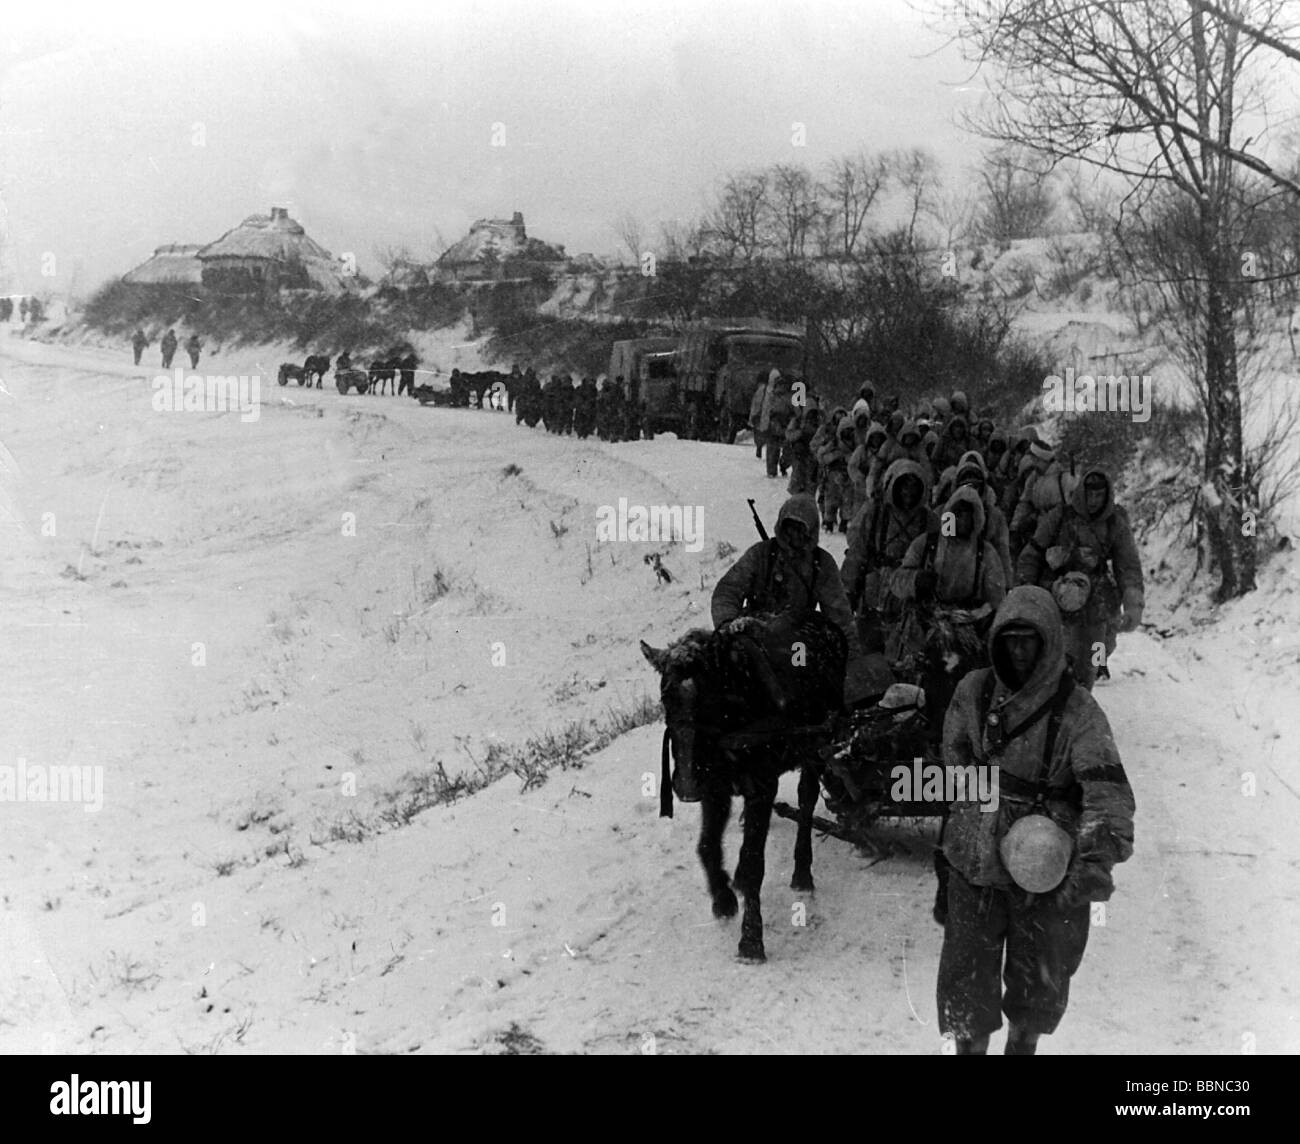 events, Second World War / WWII, Russia 1944 / 1945, German column on a road near Britskoye, Ukraine, late January 1944, infantry, march, winter clothes, clothing, snow suit, suits, sleigh, Eastern Front, Wehrmacht, Soviet Union, USSR, Army Group South, Third Reich, 20th century, historic, historical, vehicles, lorries, 1940s, people, Stock Photo